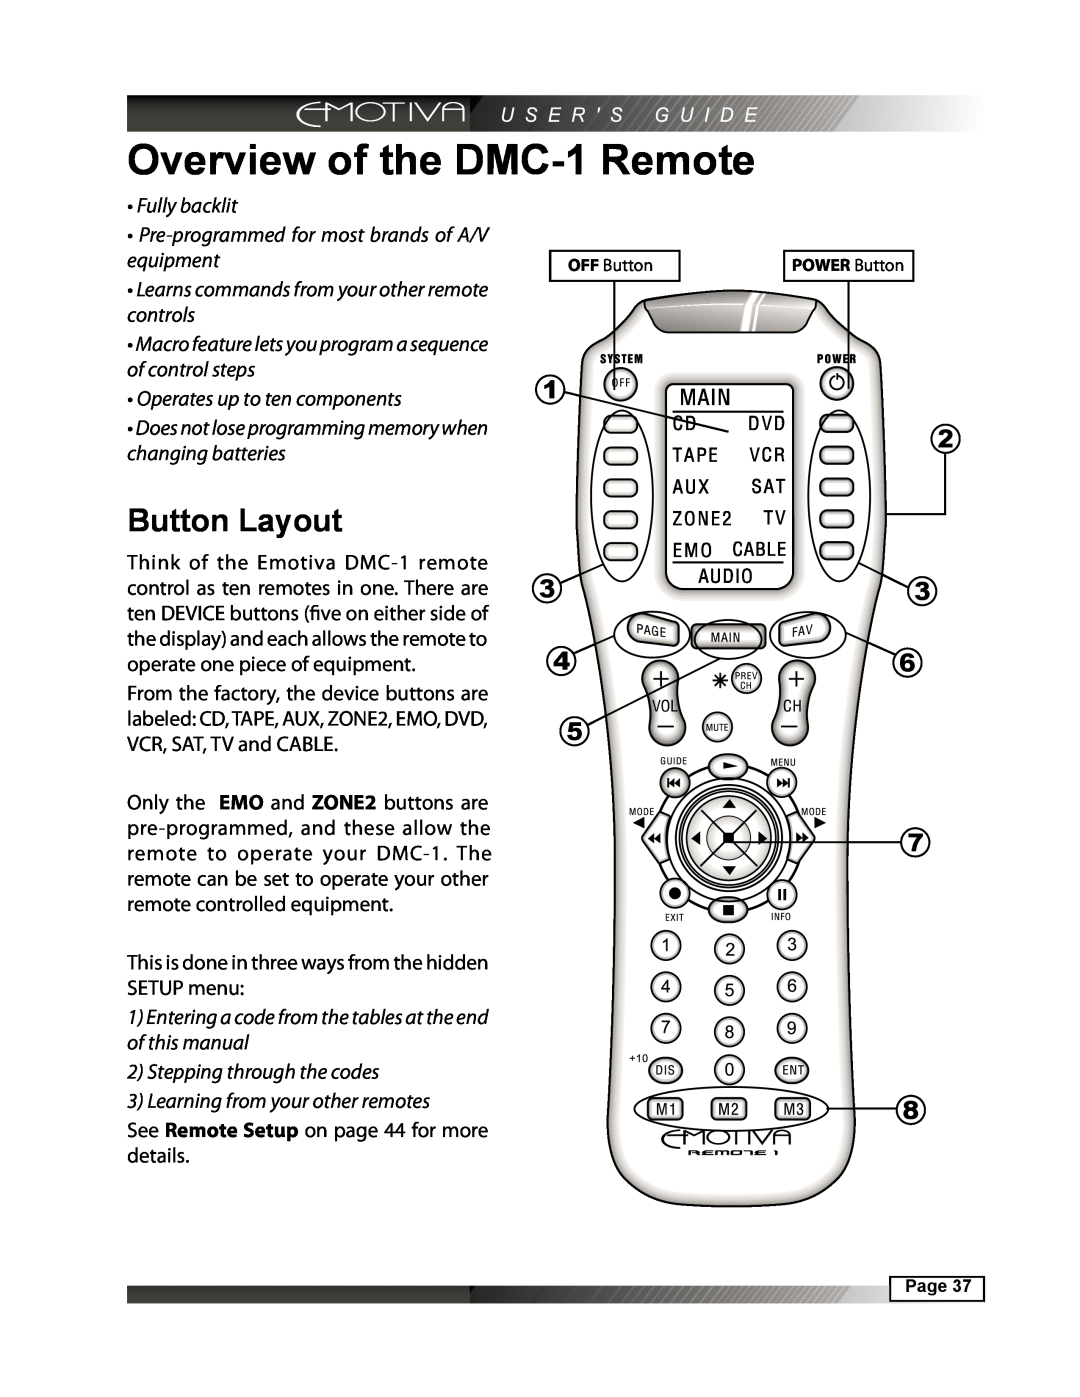 Emotiva manual Overview of the DMC-1Remote, Button Layout, 1 2 33 46 7 8 